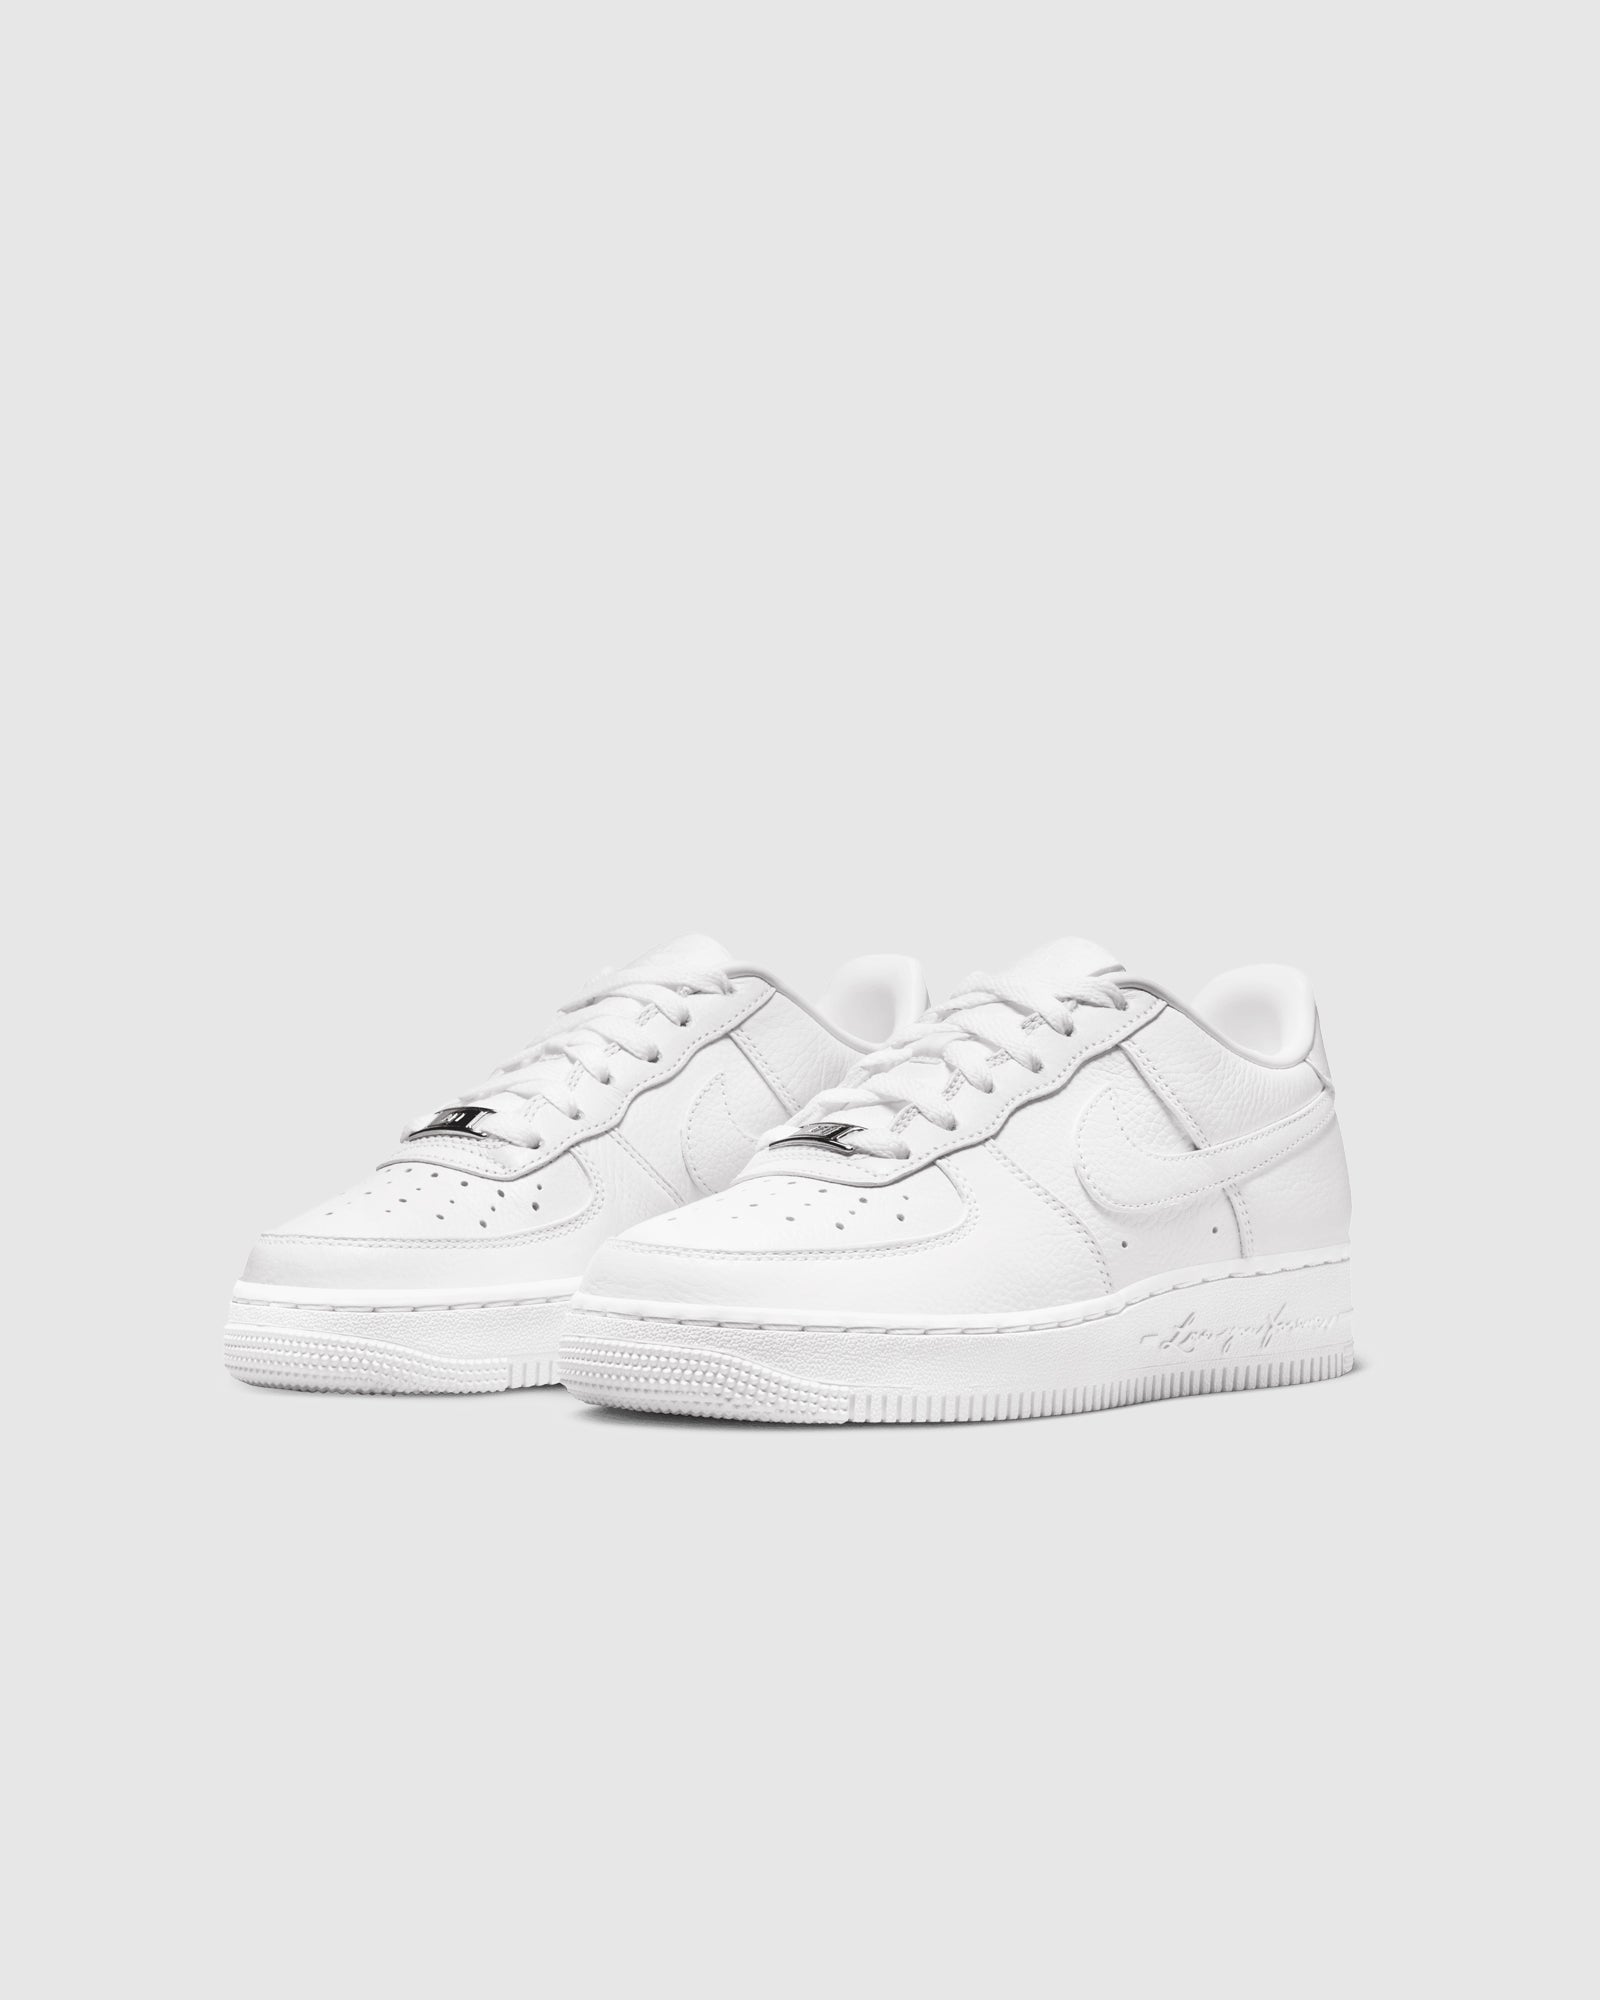 NOCTA AIR FORCE 1 LOW "CERTIFIED LOVER BOY" GS